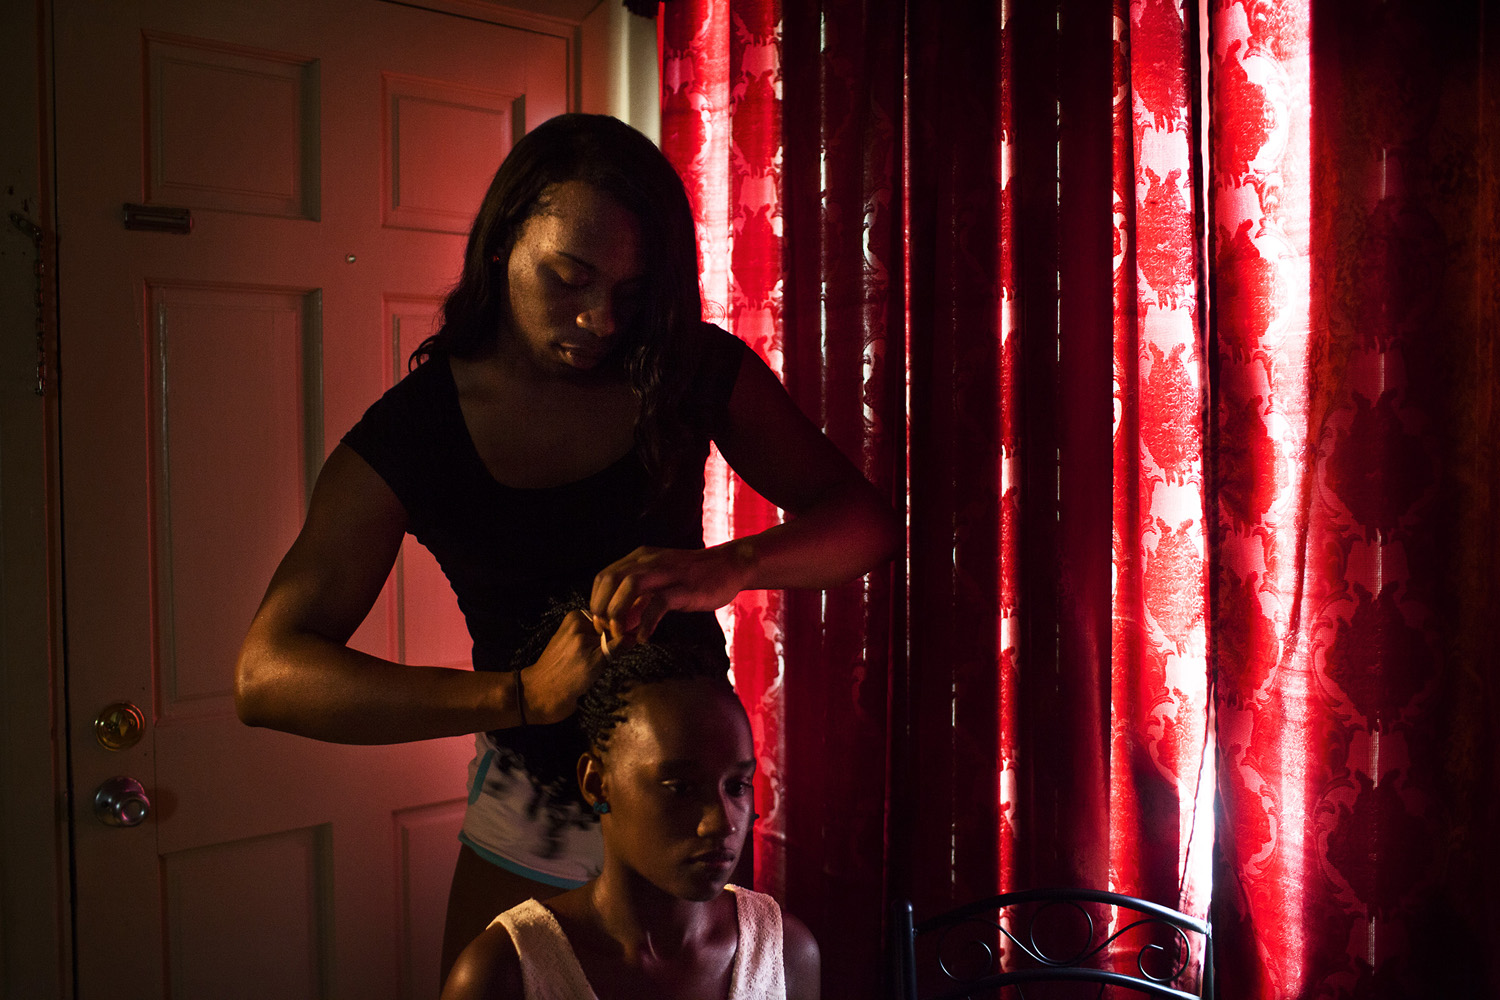 Tamara, who was born Timothy, braids her boyfriend's cousin's hair. Tamara is transgender, and has been living with her boyfriend and his sister since being kicked out of her mother's home by her mother's boyfriend. The Prancing Elites are a group of young, gay, black men who practice J-Sette, a form of dance birthed at Historically Black Colleges that is characterized by sharp, cheerleading-style movements and hip-hop performed to an eight-count beat. Traditionally, men cannot join college dance teams, so young gay black men have been forming their own J-Sette "lines," organizing competitions, and creating their own outlets to practice this type of dance.